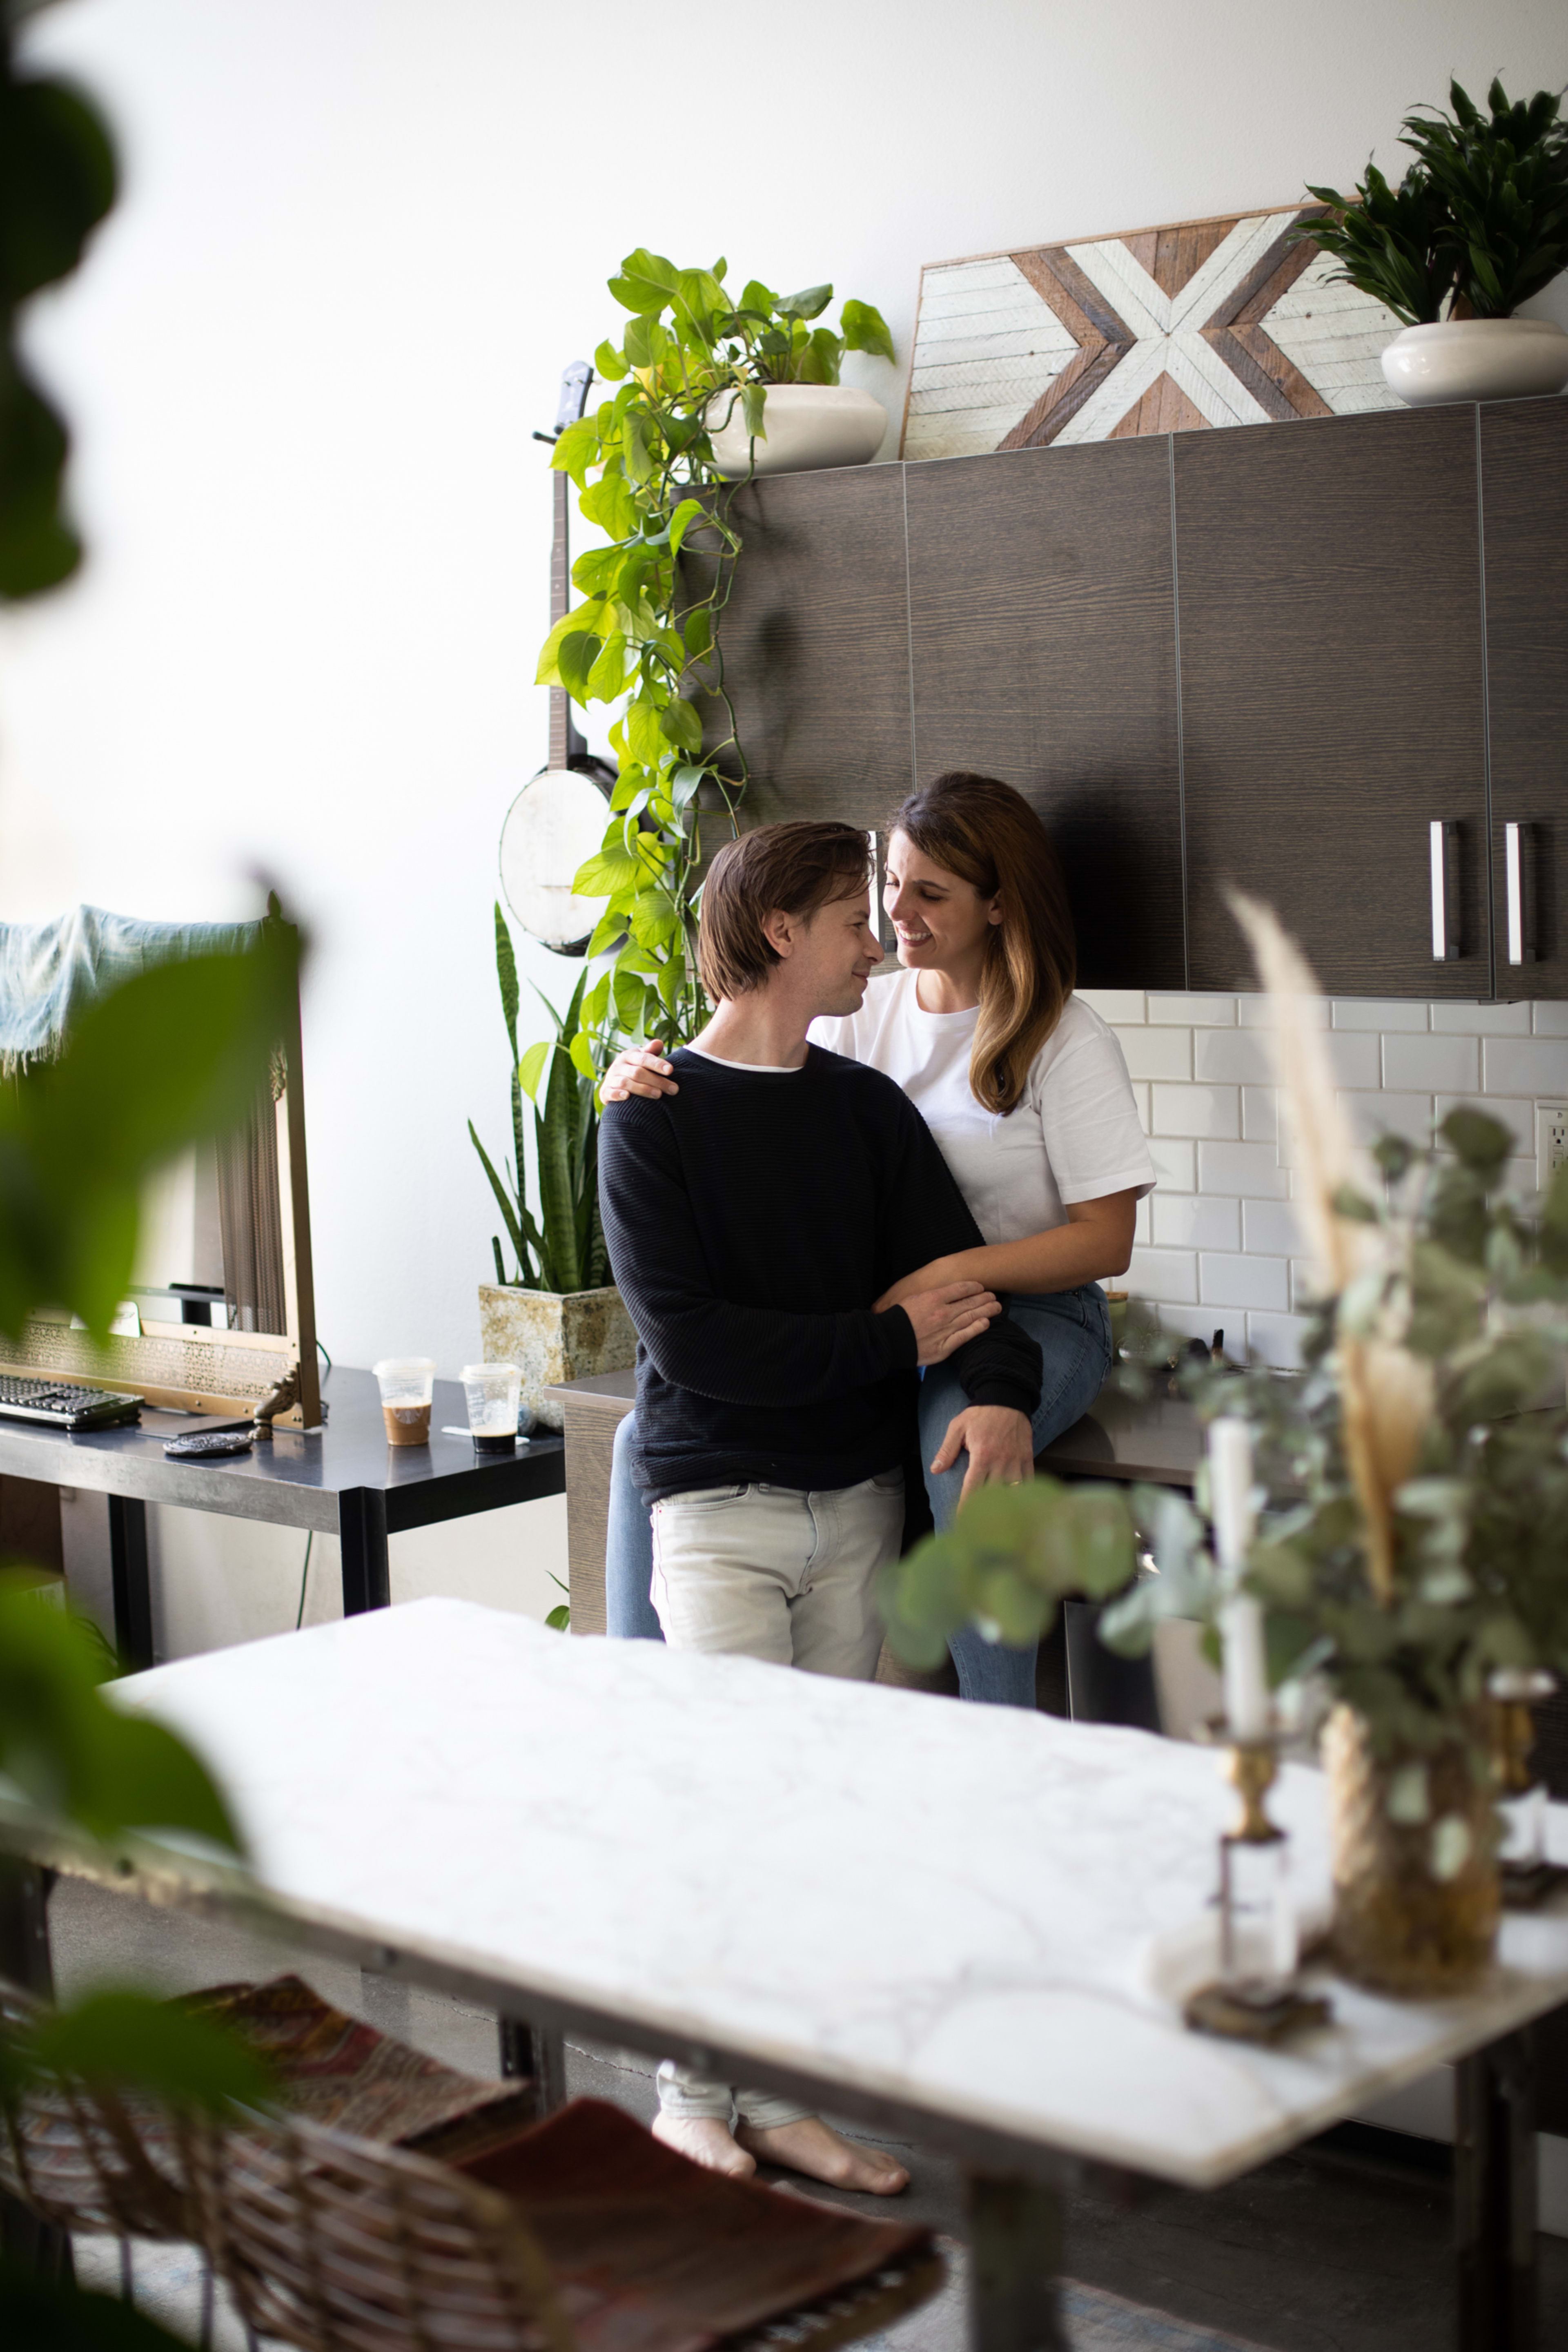 A couple embracing in a kitchen surrounded by plants.